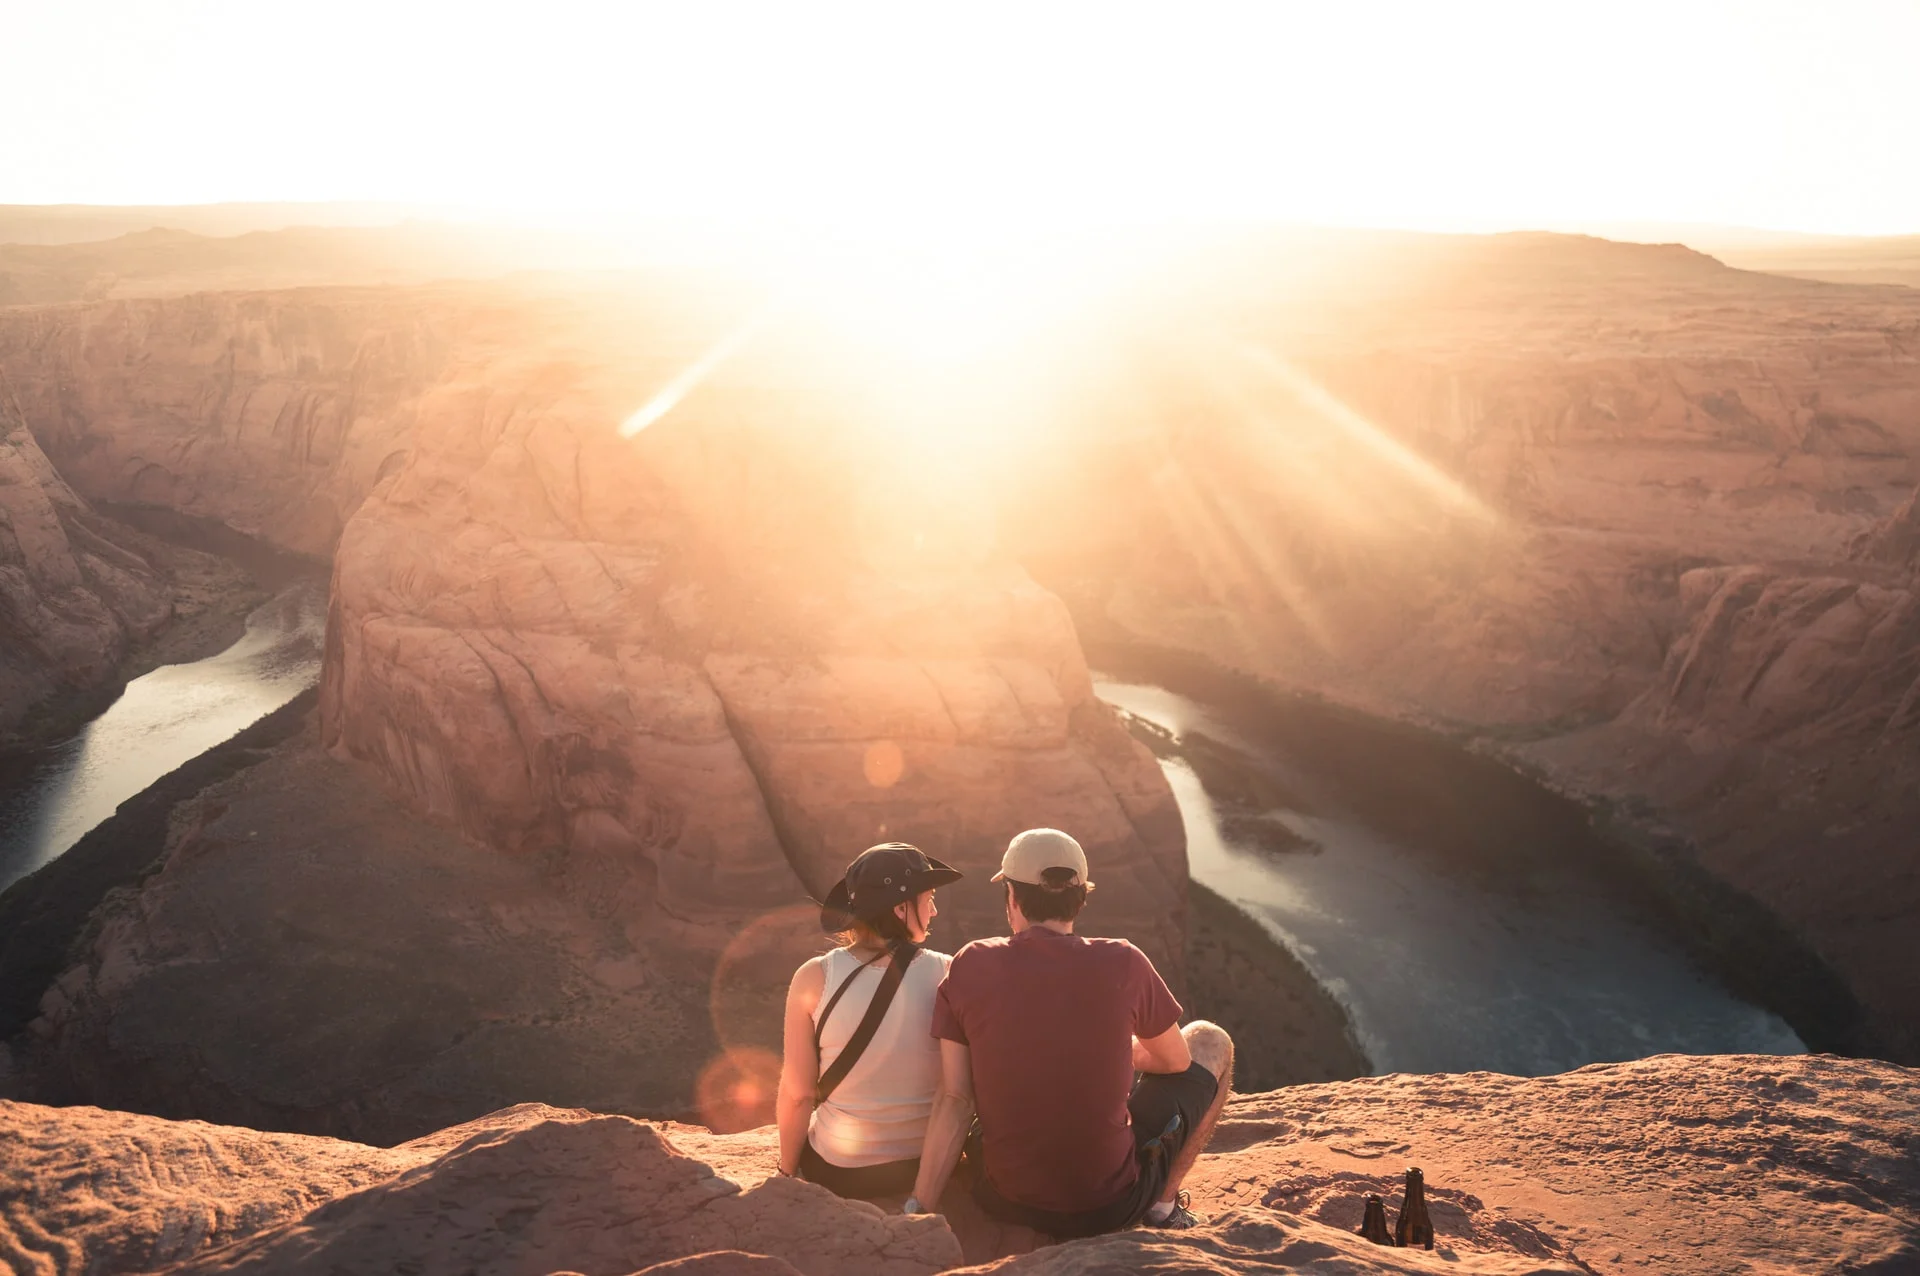 A couple watch the sunset on a hike - get ideas for the most romantic gifts for hikers and campers